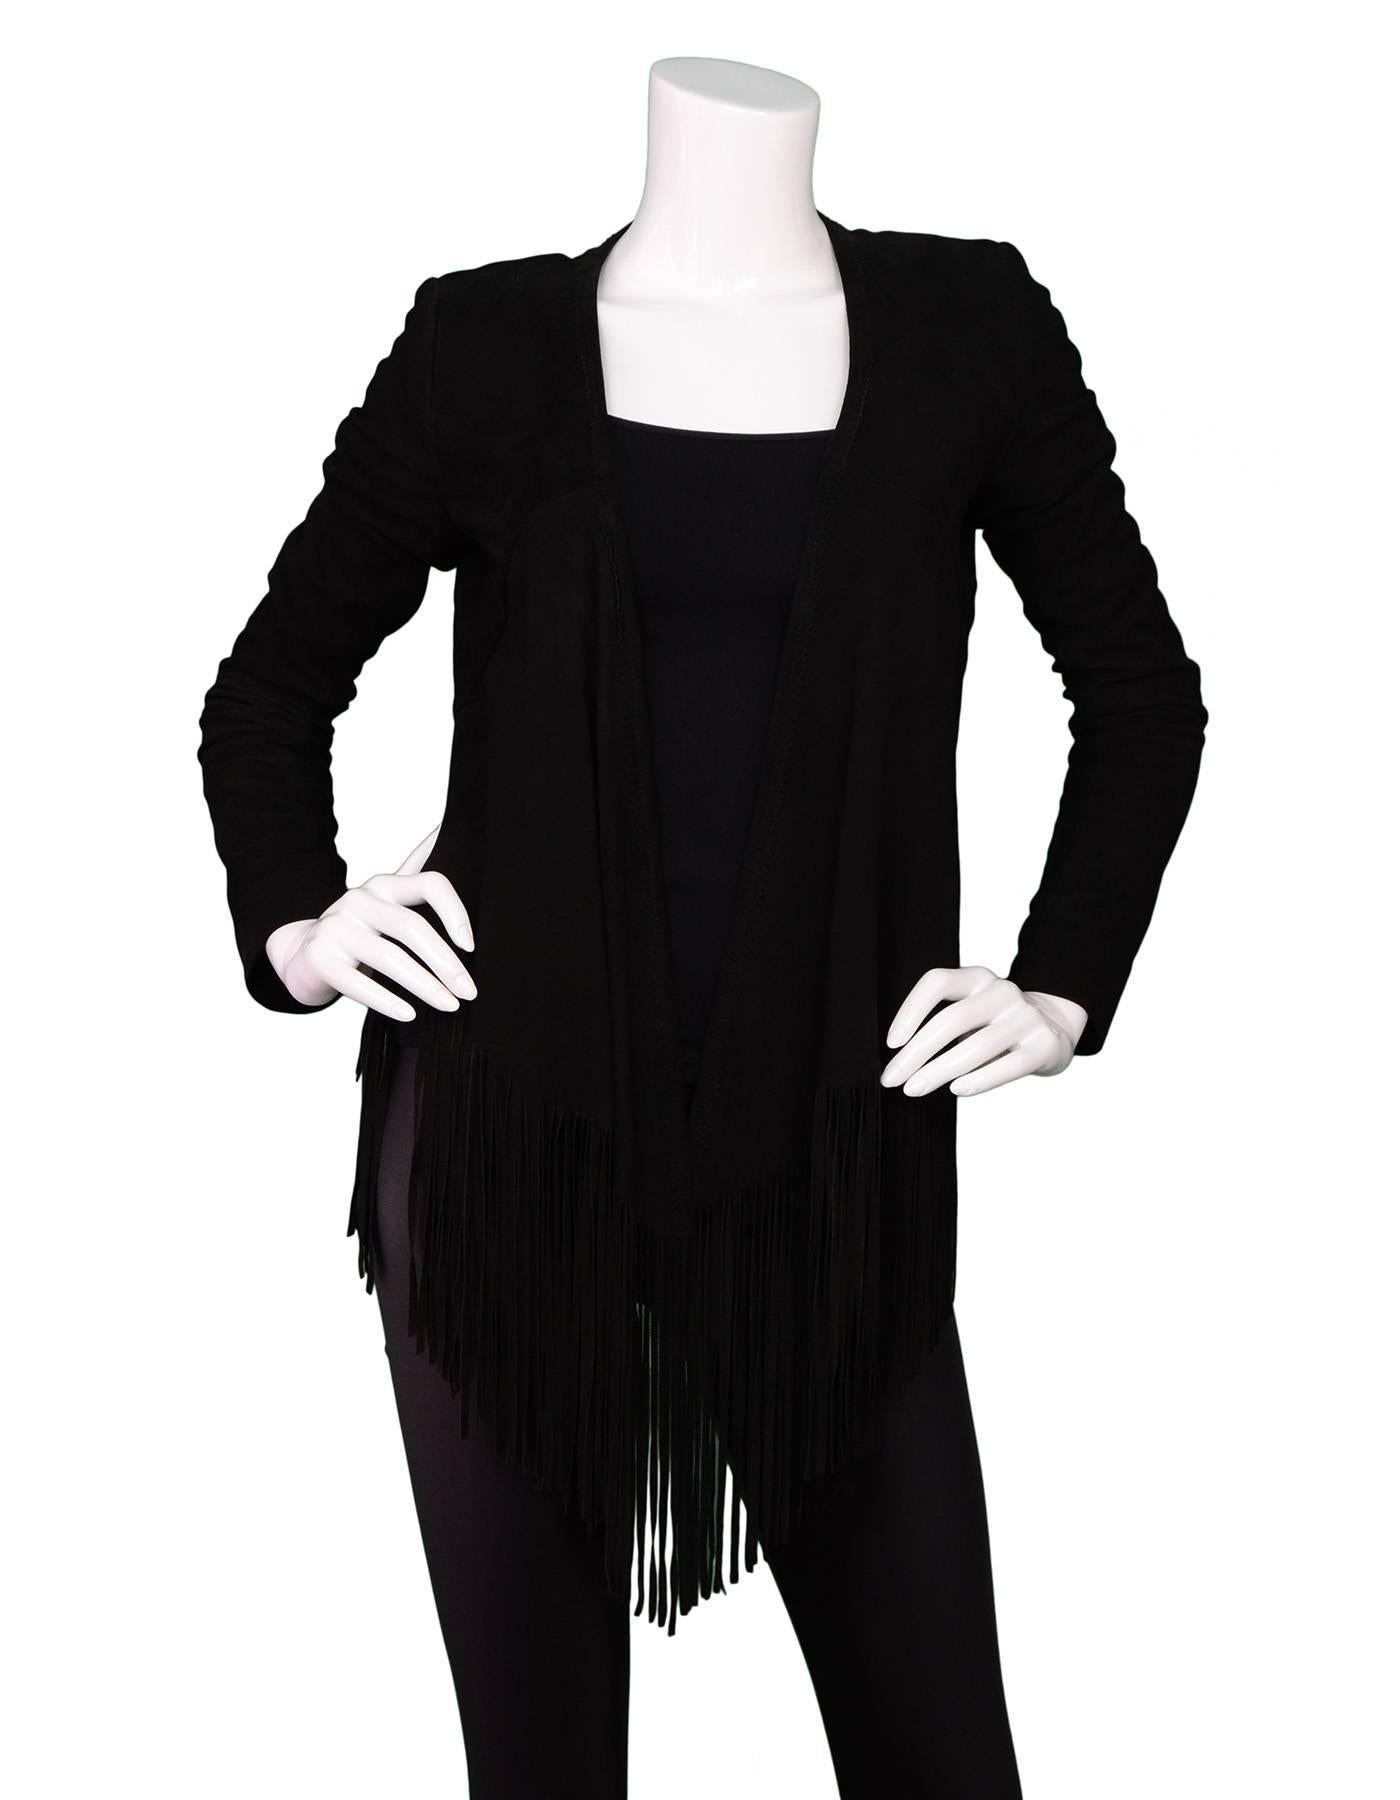 Haute Hippie Black Suede Fringe Jacket Sz XS/S

Made In: China
Color: Black
Composition: 100% leather
Lining: Black 100% cotton
Closure/Opening: Open front
Retail Price: $595 + tax
Overall Condition: Excellent pre-owned condition with the exception